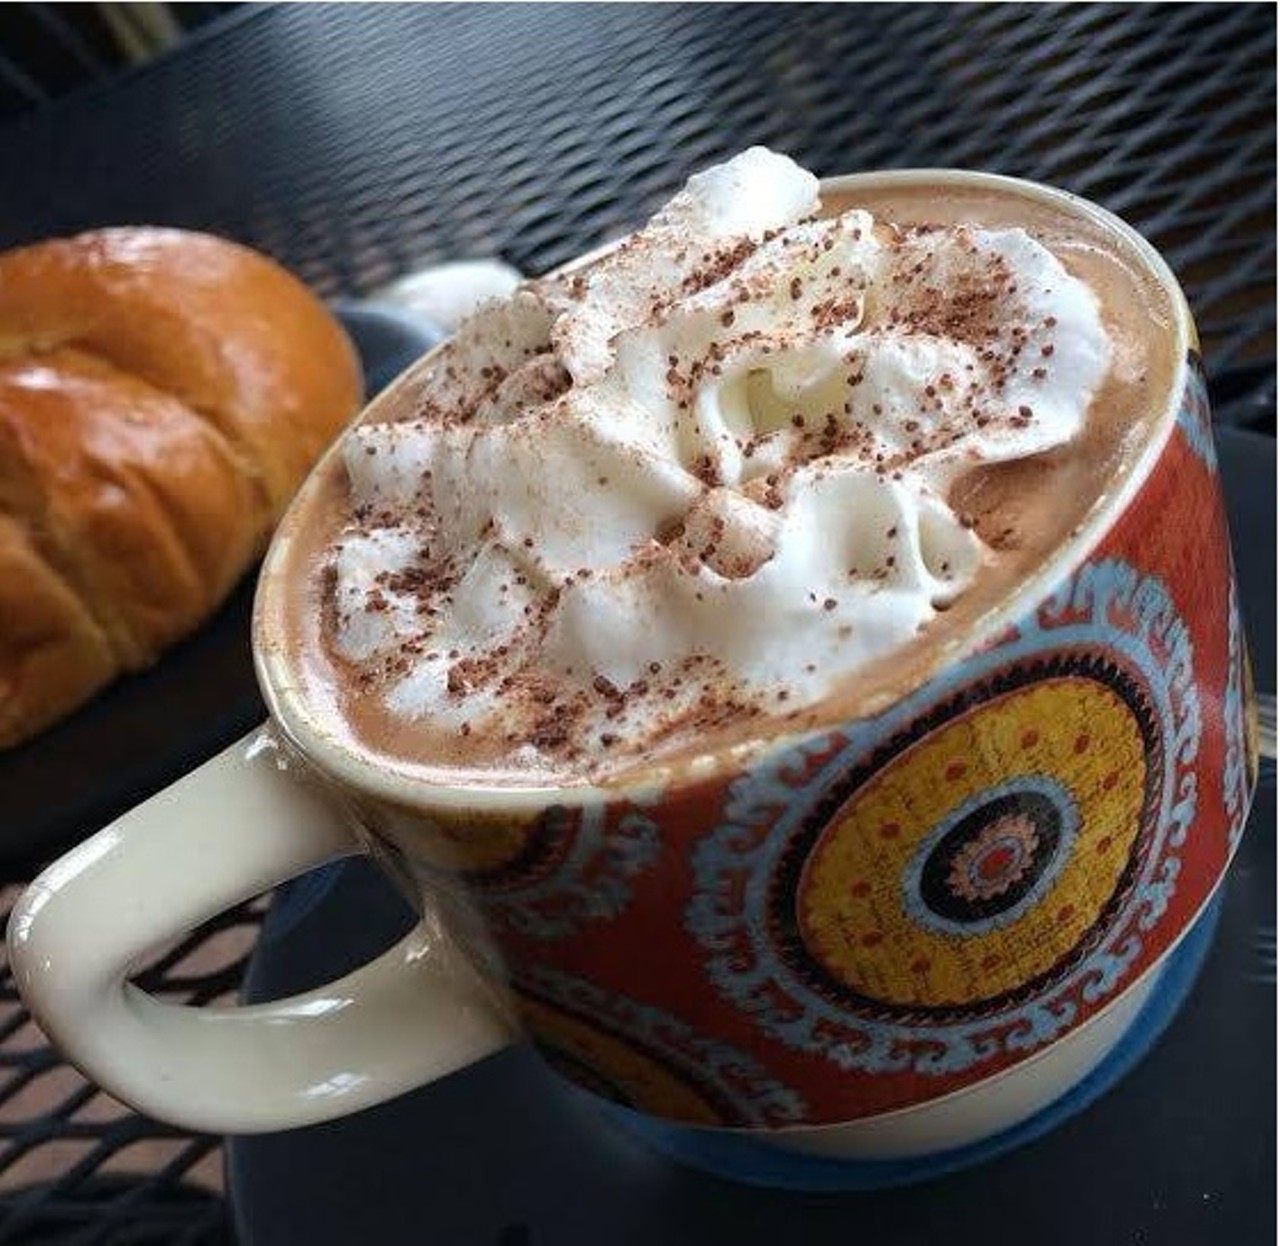 Cafe Con Leche - 4200 W. Vernor, Detroit - 313-554-1744 - With a Latin-infused menu, Cafe Con Leche goes beyond the familiar with cinnamon-spiced Mexican hot chocolate and other rich hot chocolate drinks. $2.45-$4. (Photo via Facebook, At Cafe Con Leche)